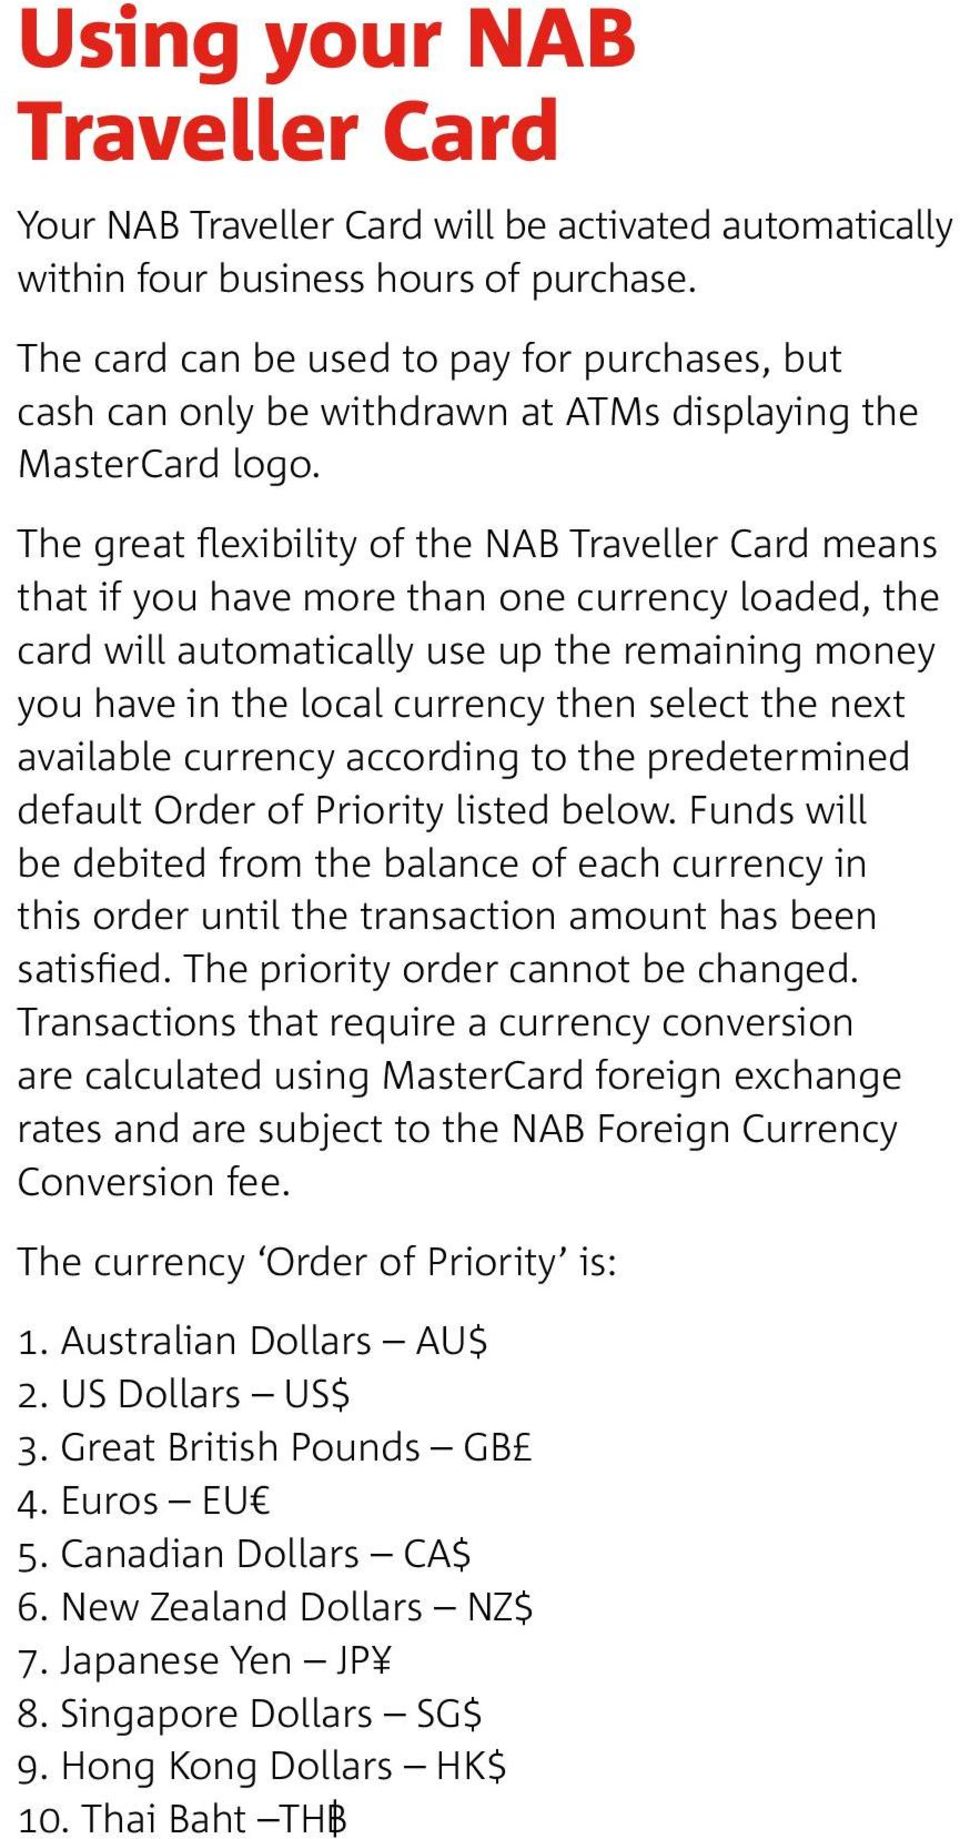 The great flexibility of the NAB Traveller Card means that if you have more than one currency loaded, the card will automatically use up the remaining money you have in the local currency then select